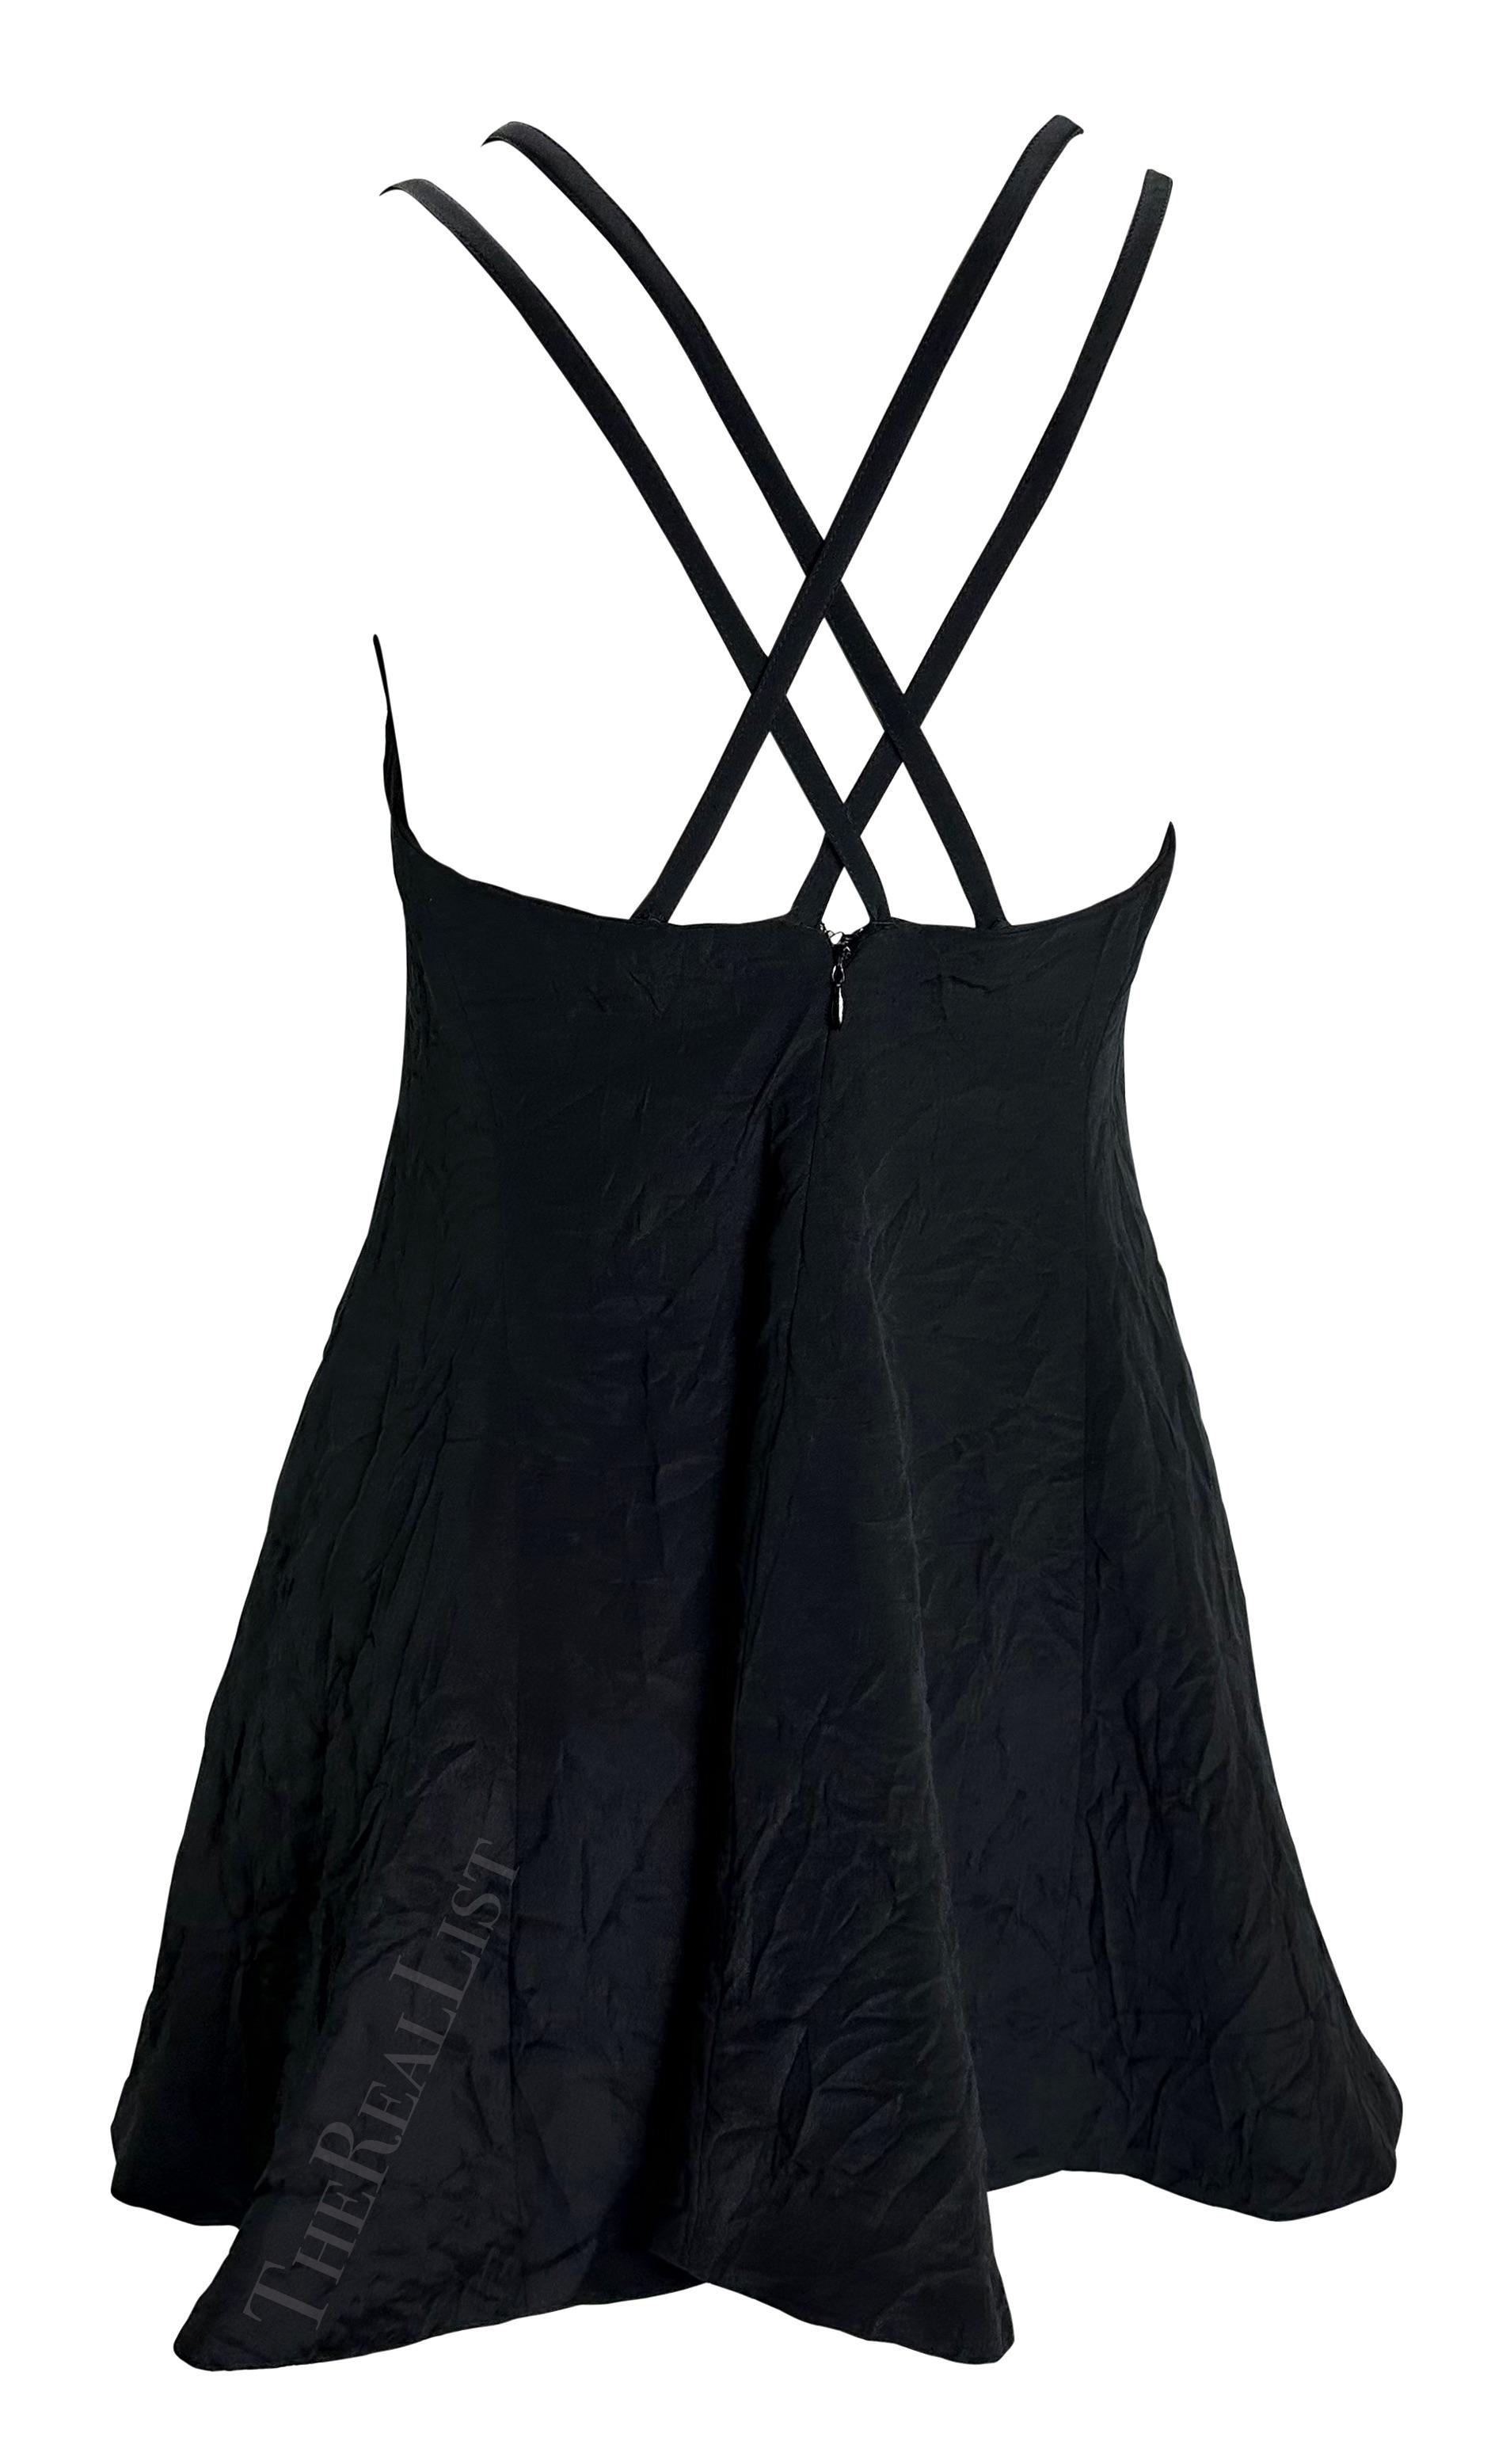 S/S 1994 Gianni Versace Black Wrinkled Punk Flare Mini Baby Doll Dress For Sale 1